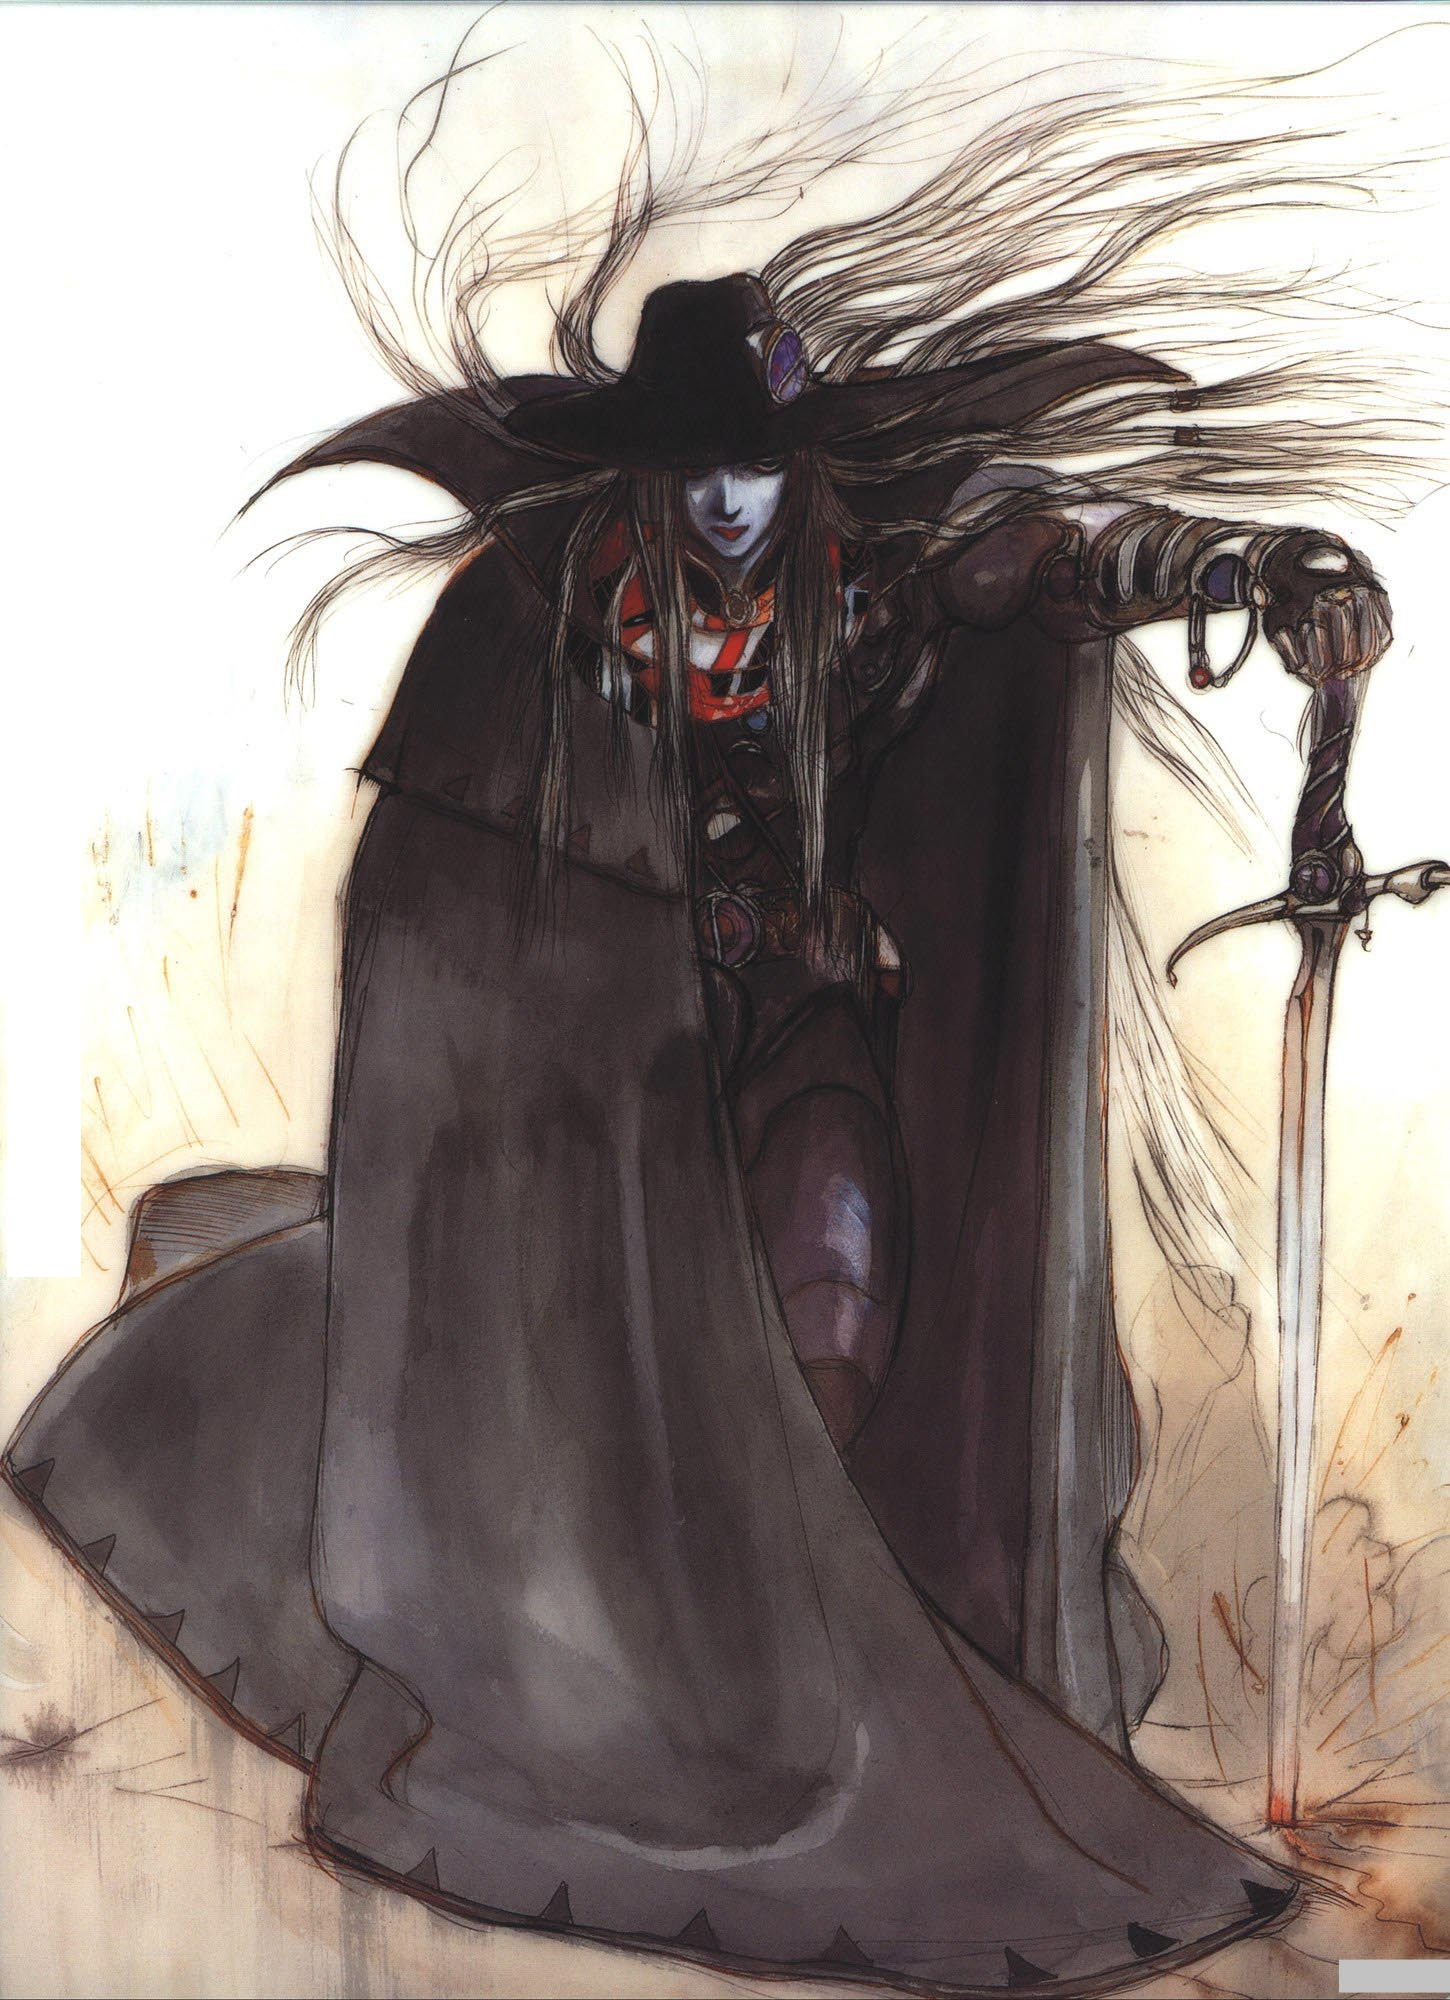 50 Facts about the movie Vampire Hunter D: Bloodlust 